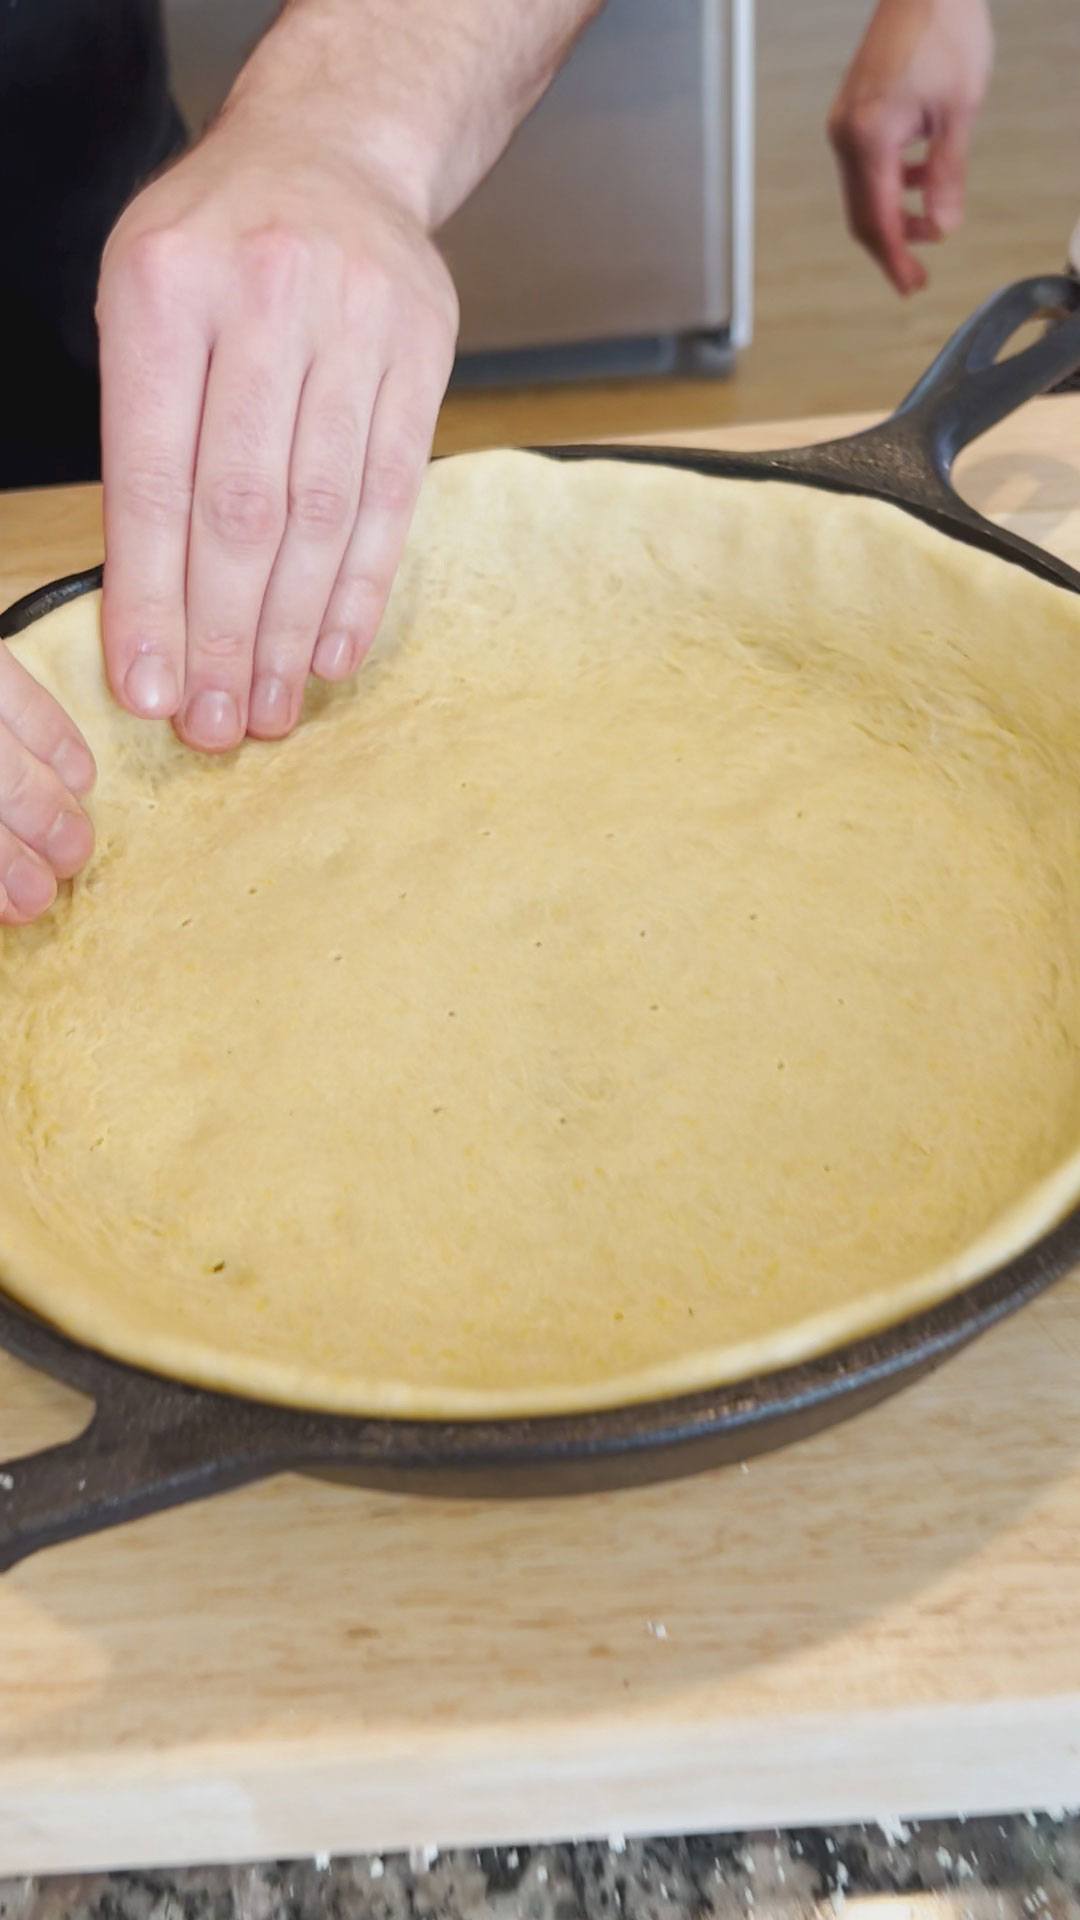 Deep dish pizza dough stretched to the circumference of the cast iron skillet 